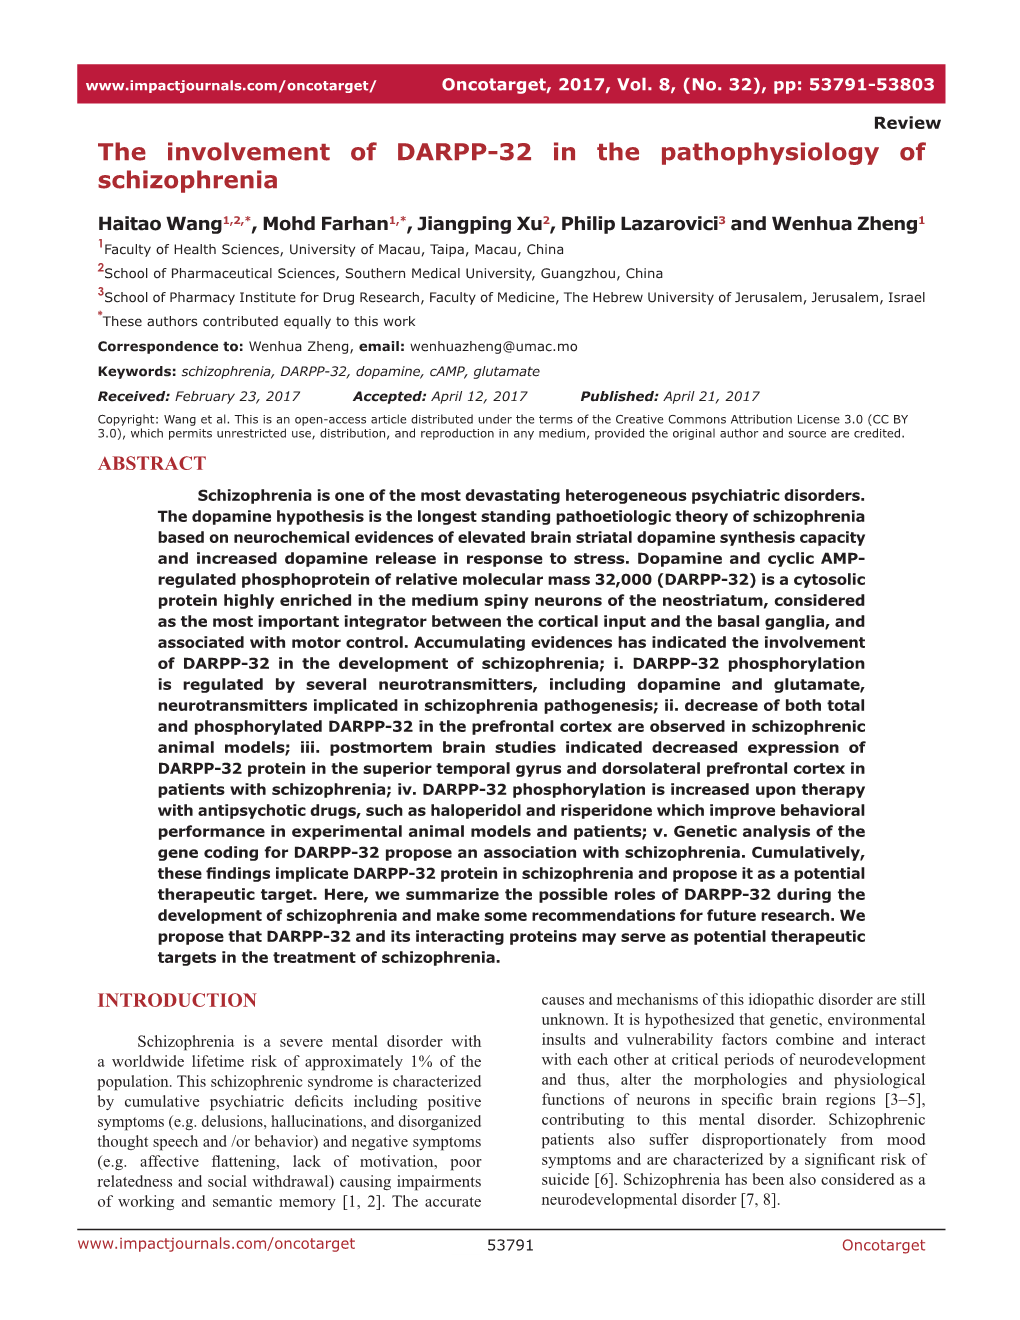 The Involvement of DARPP-32 in the Pathophysiology of Schizophrenia